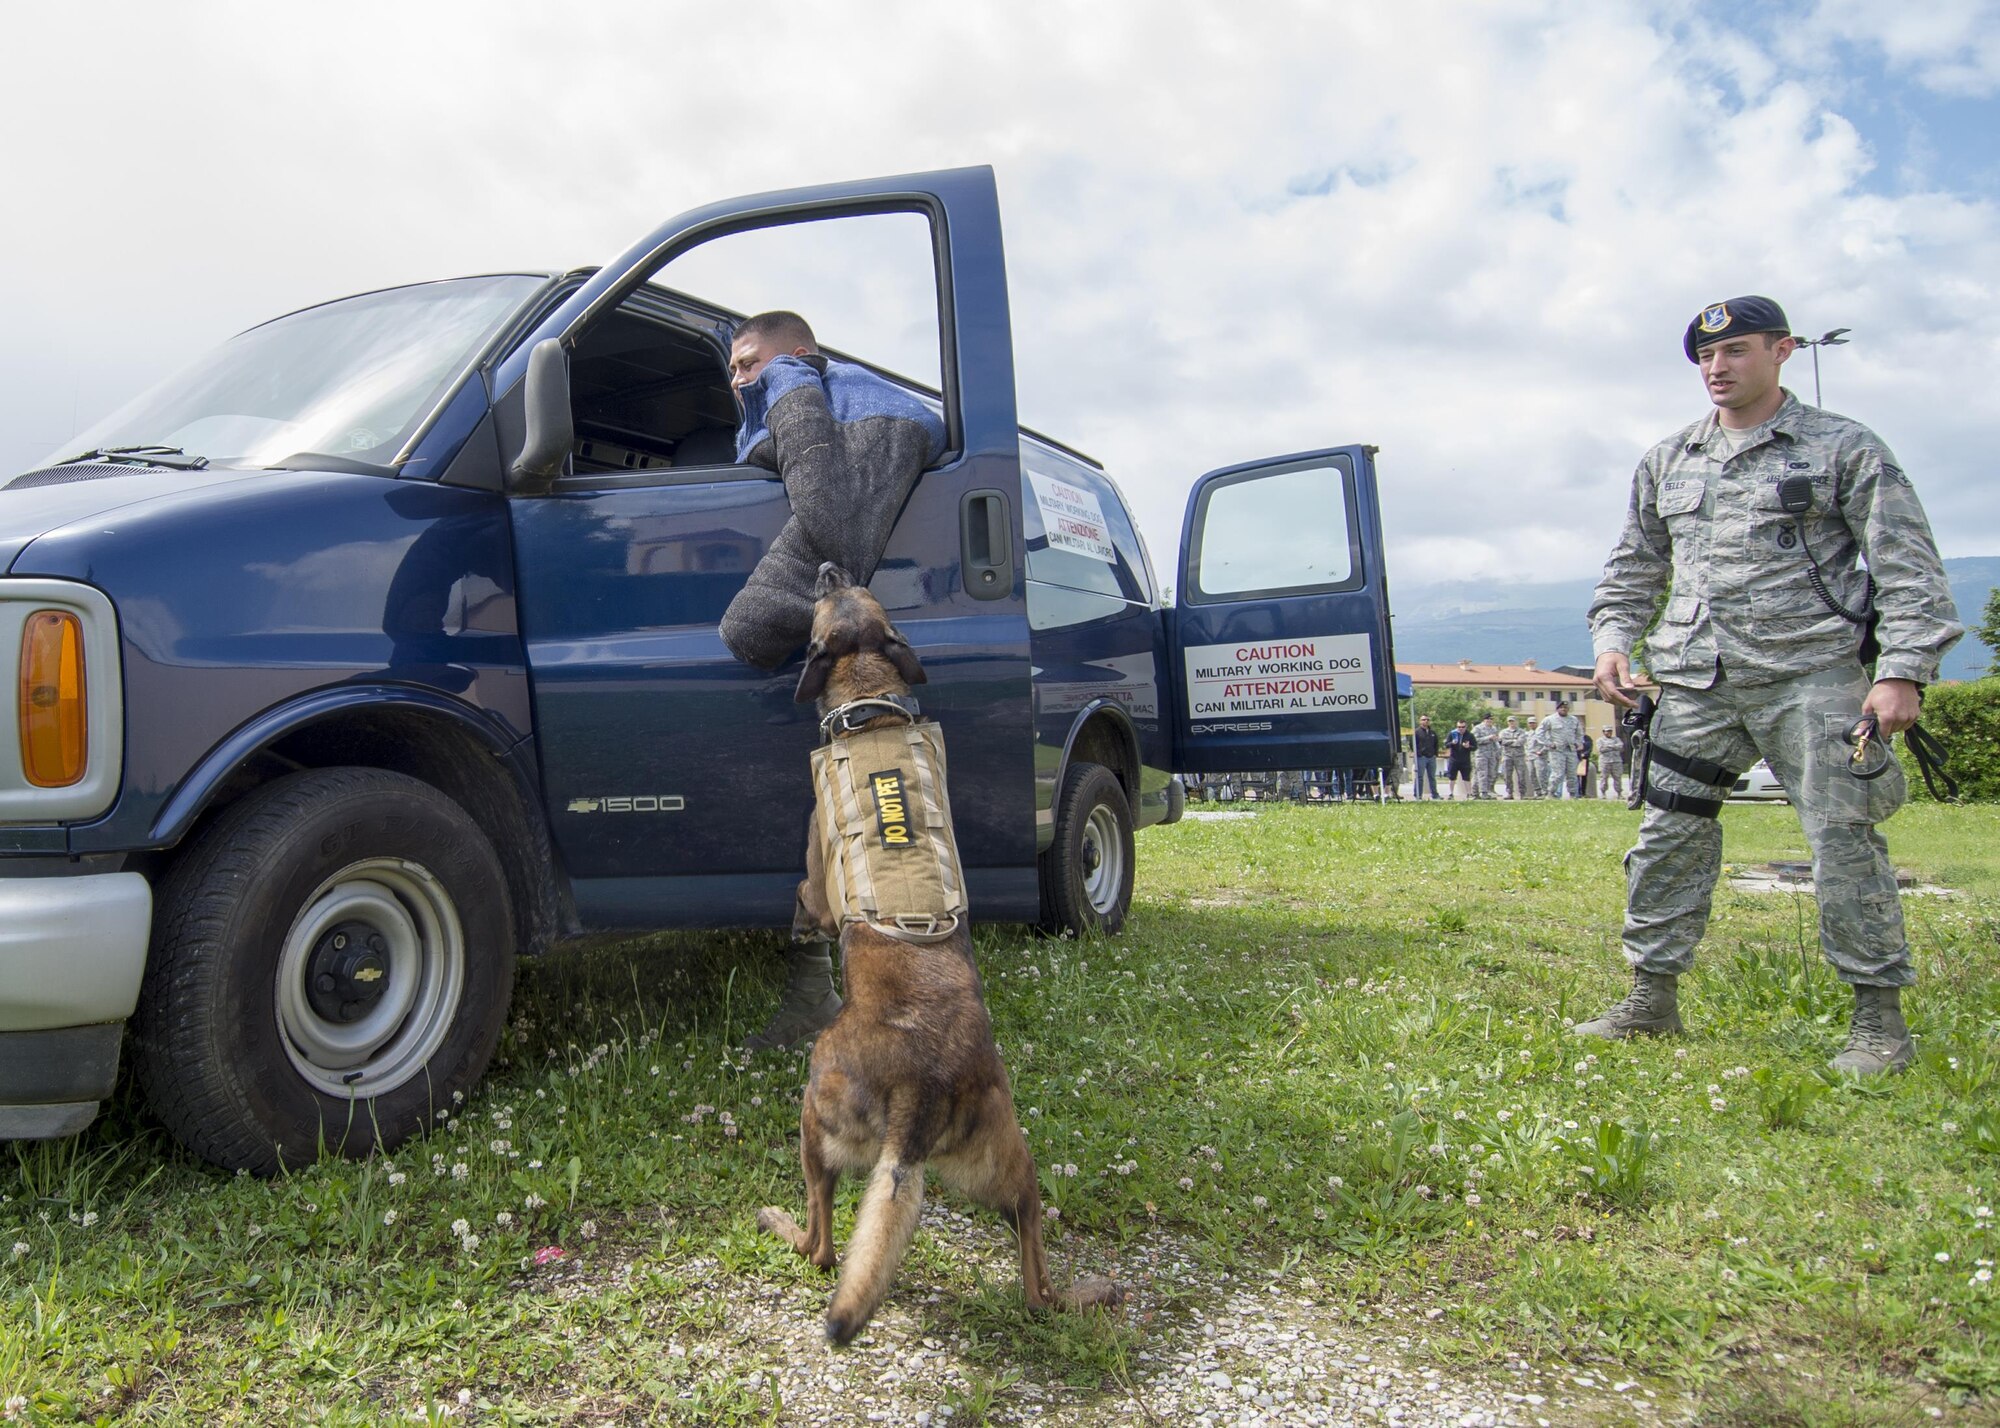 Senior Airman Jonathan Eells, 31st Security Force Squadron military working dog handler, and Rocky, 31st SFS MWD, demonstrate the apprehension of a suspect during a MWD demo during National Police Week May 16, 2016, at Aviano Air Base, Italy. The demo also served as a training opportunity for Rocky, it provided distractions, such as sounds and scents, which helps train MWD to maintain focus. (U.S. Air Force photo by Airman 1st Class Cory W. Bush/Released)